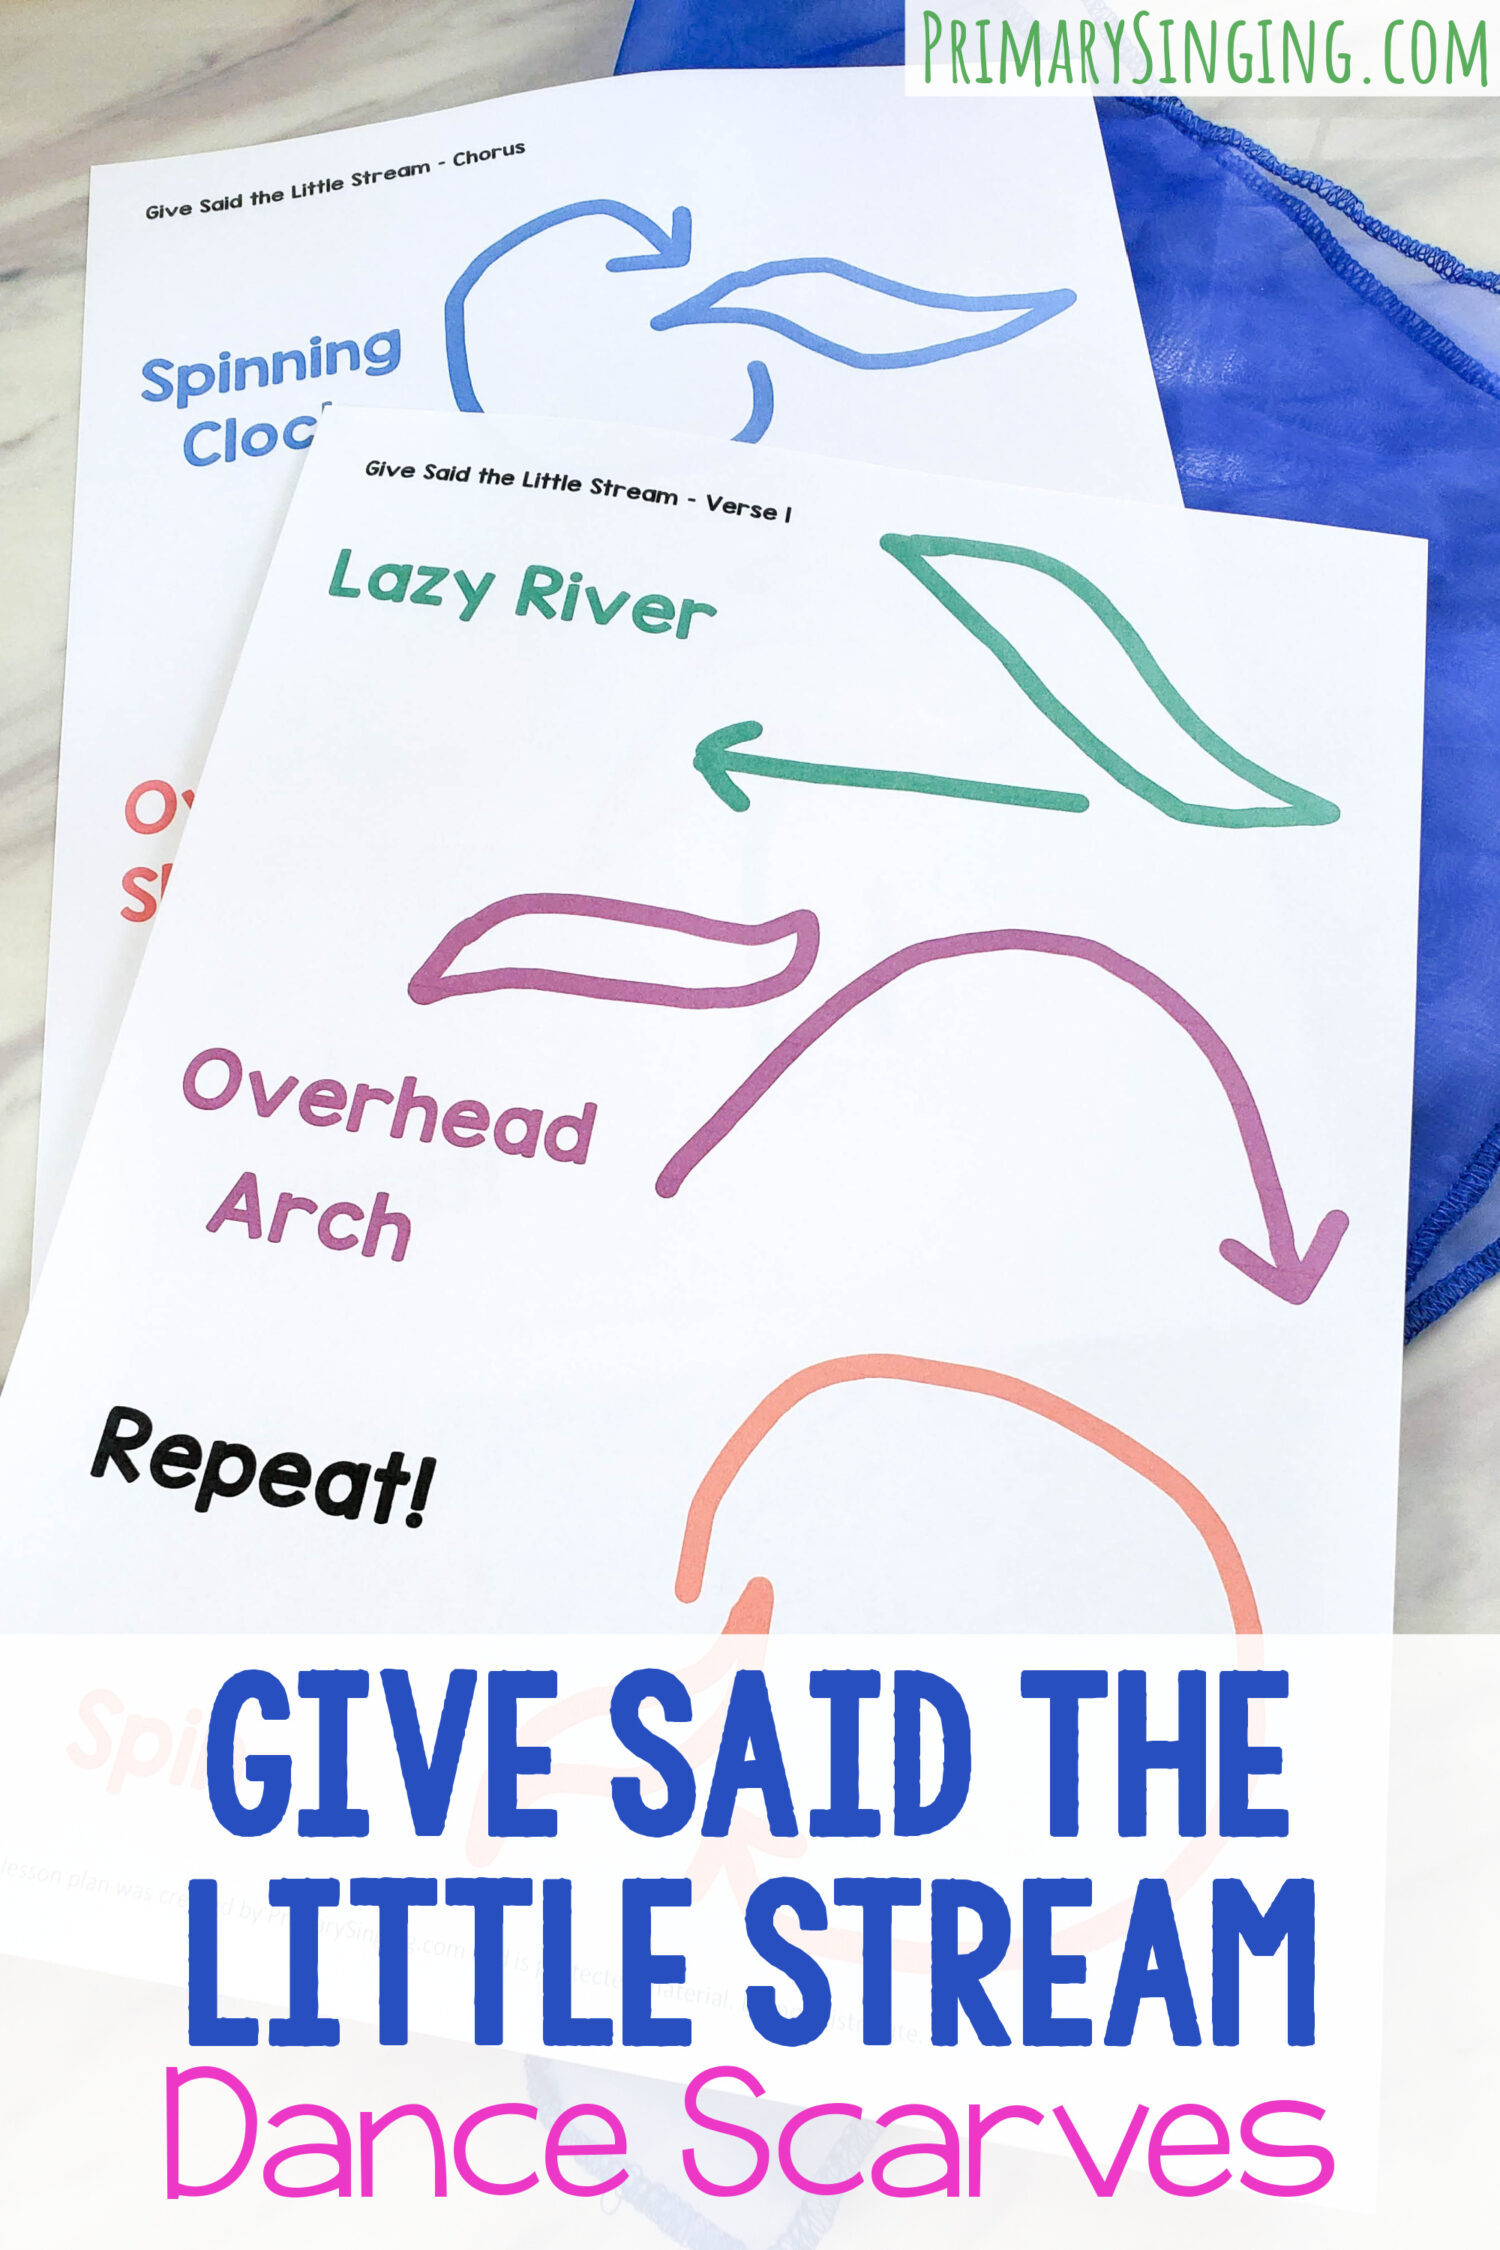 Give Said the Little Stream Dance Scarves fun simple pattern that coordinates with the lyrics and helps represent the "give" nature of the song! With a printable dance scarves chart for LDS Primary Music Leaders.